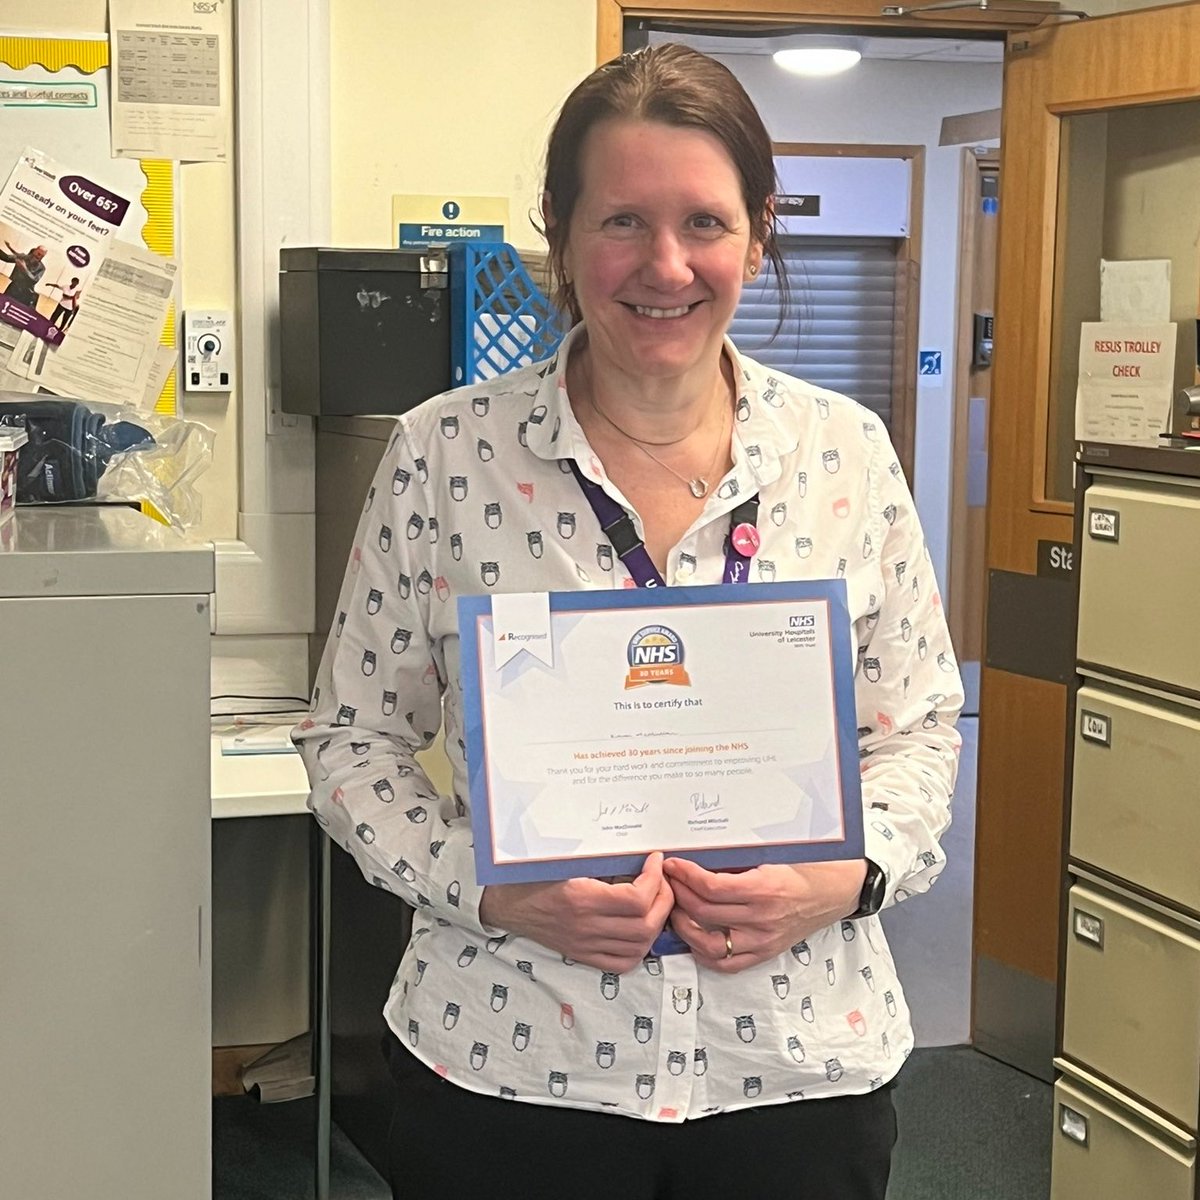 Congratulations to Karen McMullan, Therapy Specialty Lead, who has achieved 30 years’ NHS service. Karen said: 'When I started as a band 2 ‘Occupational Therapist Helper’ I only intended to stay for a year! 30 years on, I have trained and qualified as an Occupational Therapist.'